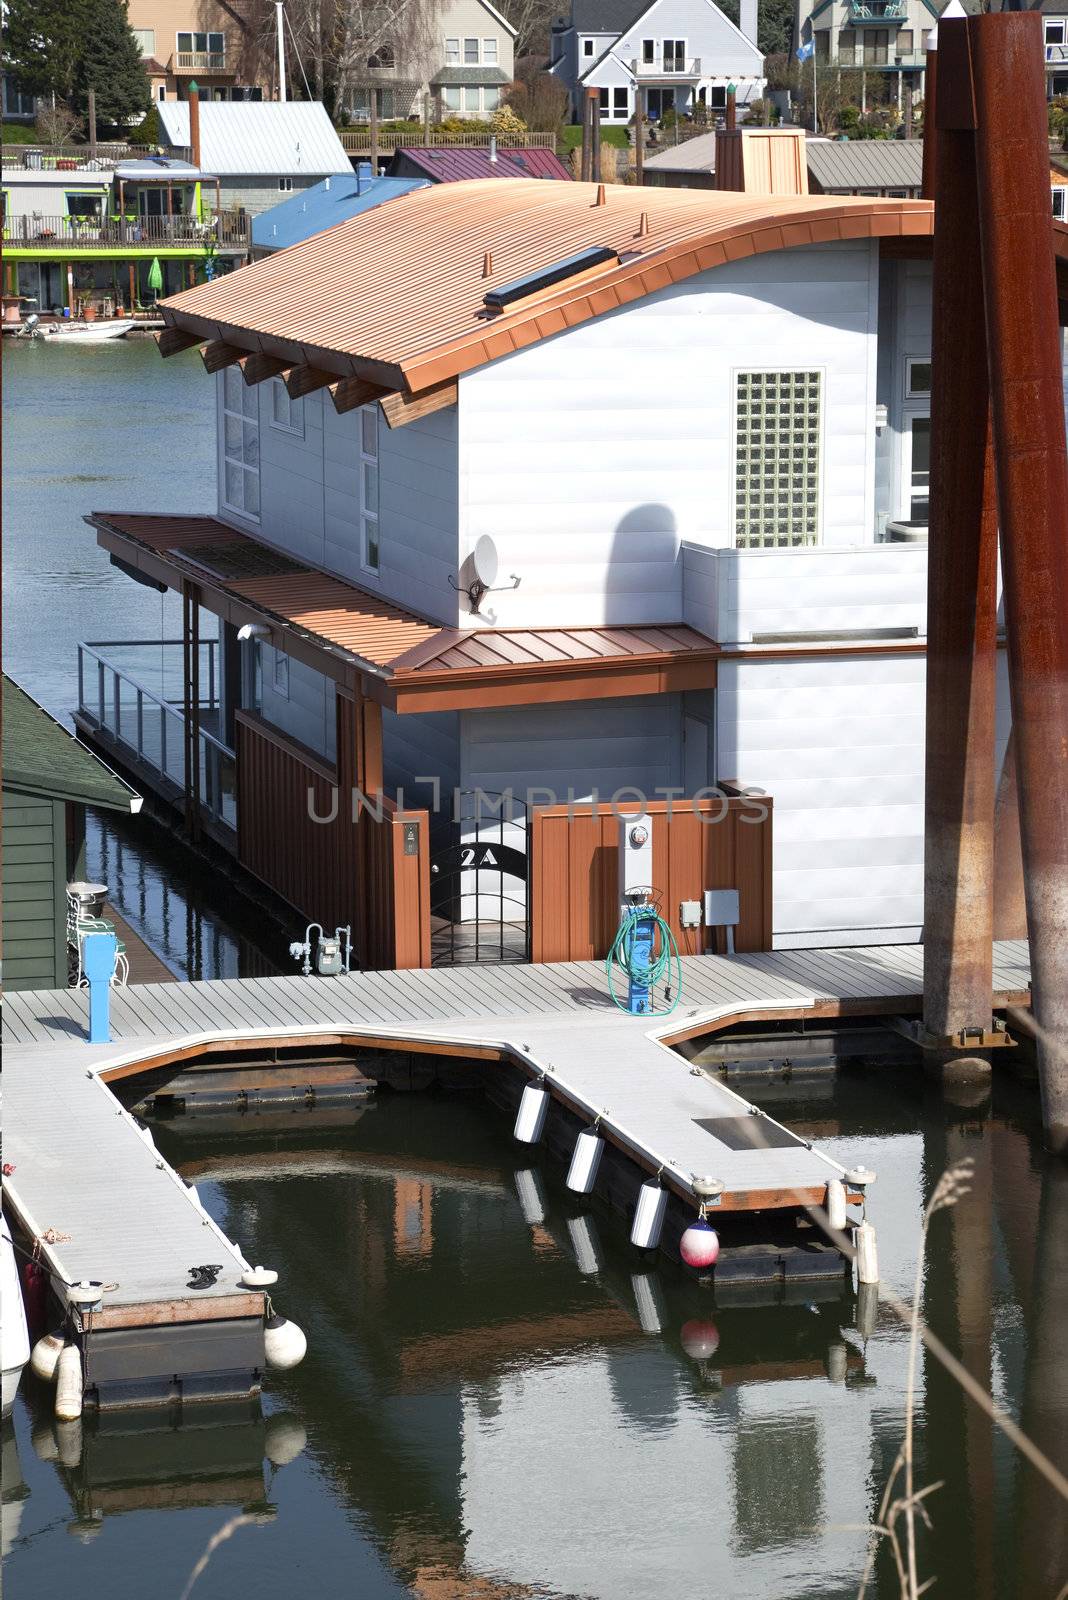 Floating homes and parking space, Portland OR.